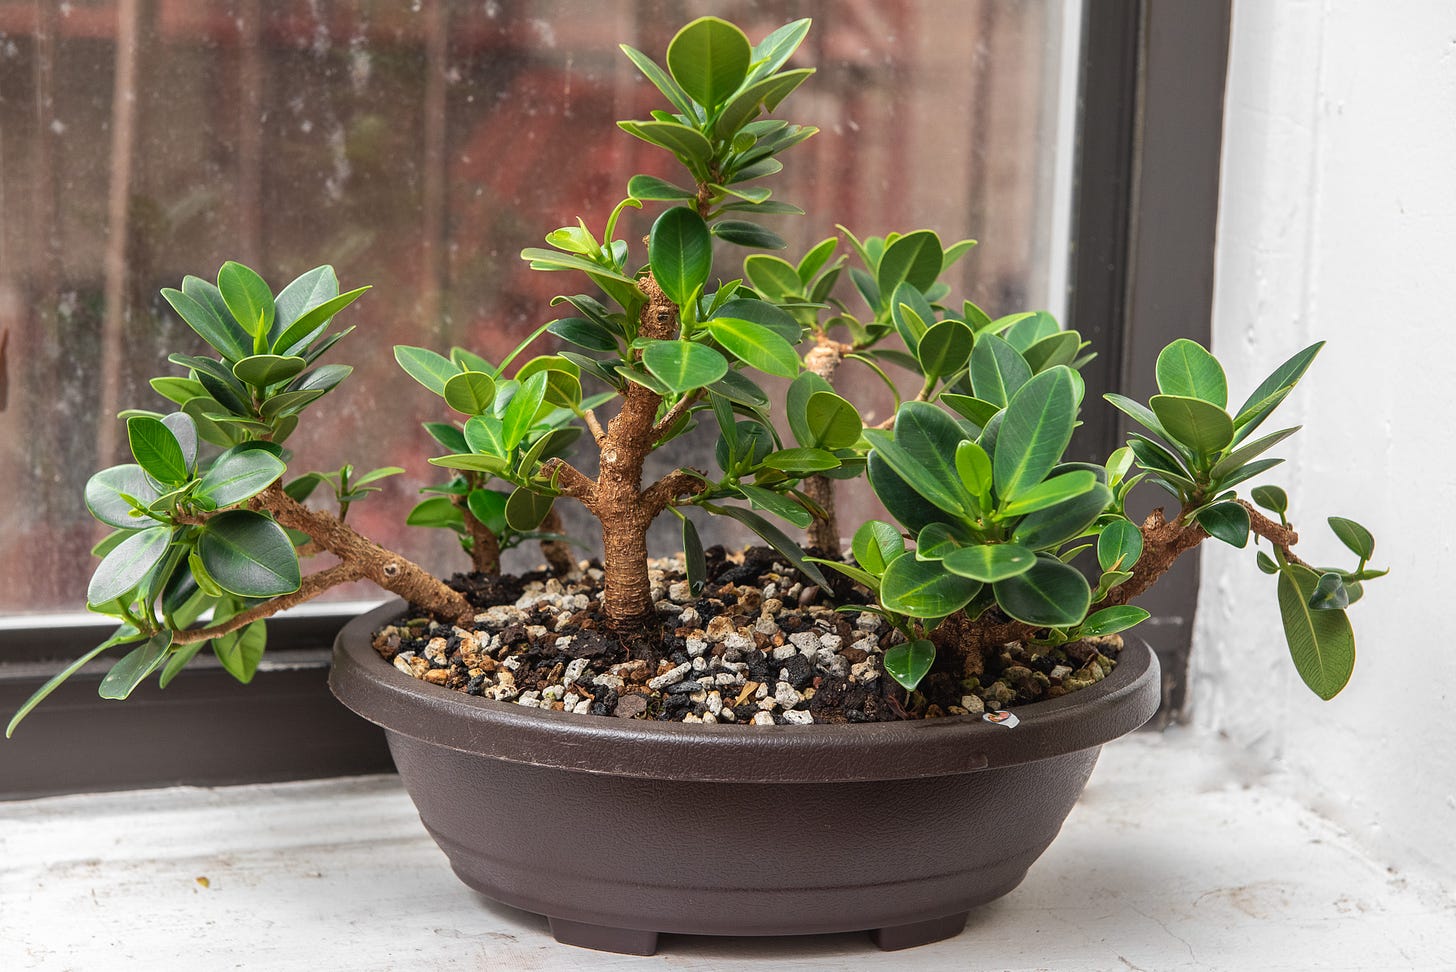 ID: Oval plastic bonsai training pot with a forest planting of 9 small ficus microcarpa trees. All other photos below are of the same forest from different directions, unless noted otherwise